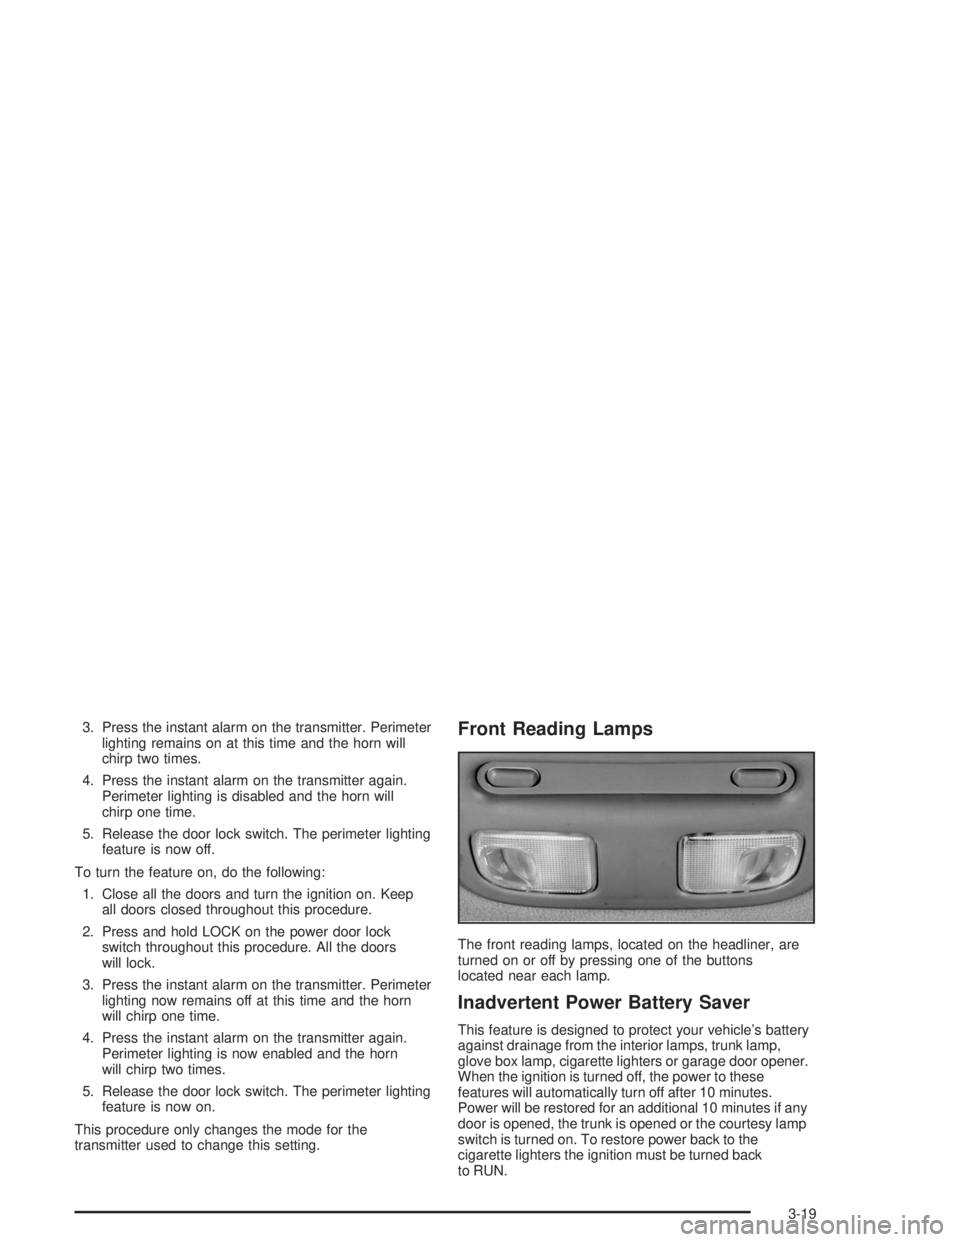 BUICK LESABRE 2004  Owners Manual 3. Press the instant alarm on the transmitter. Perimeter
lighting remains on at this time and the horn will
chirp two times.
4. Press the instant alarm on the transmitter again.
Perimeter lighting is 